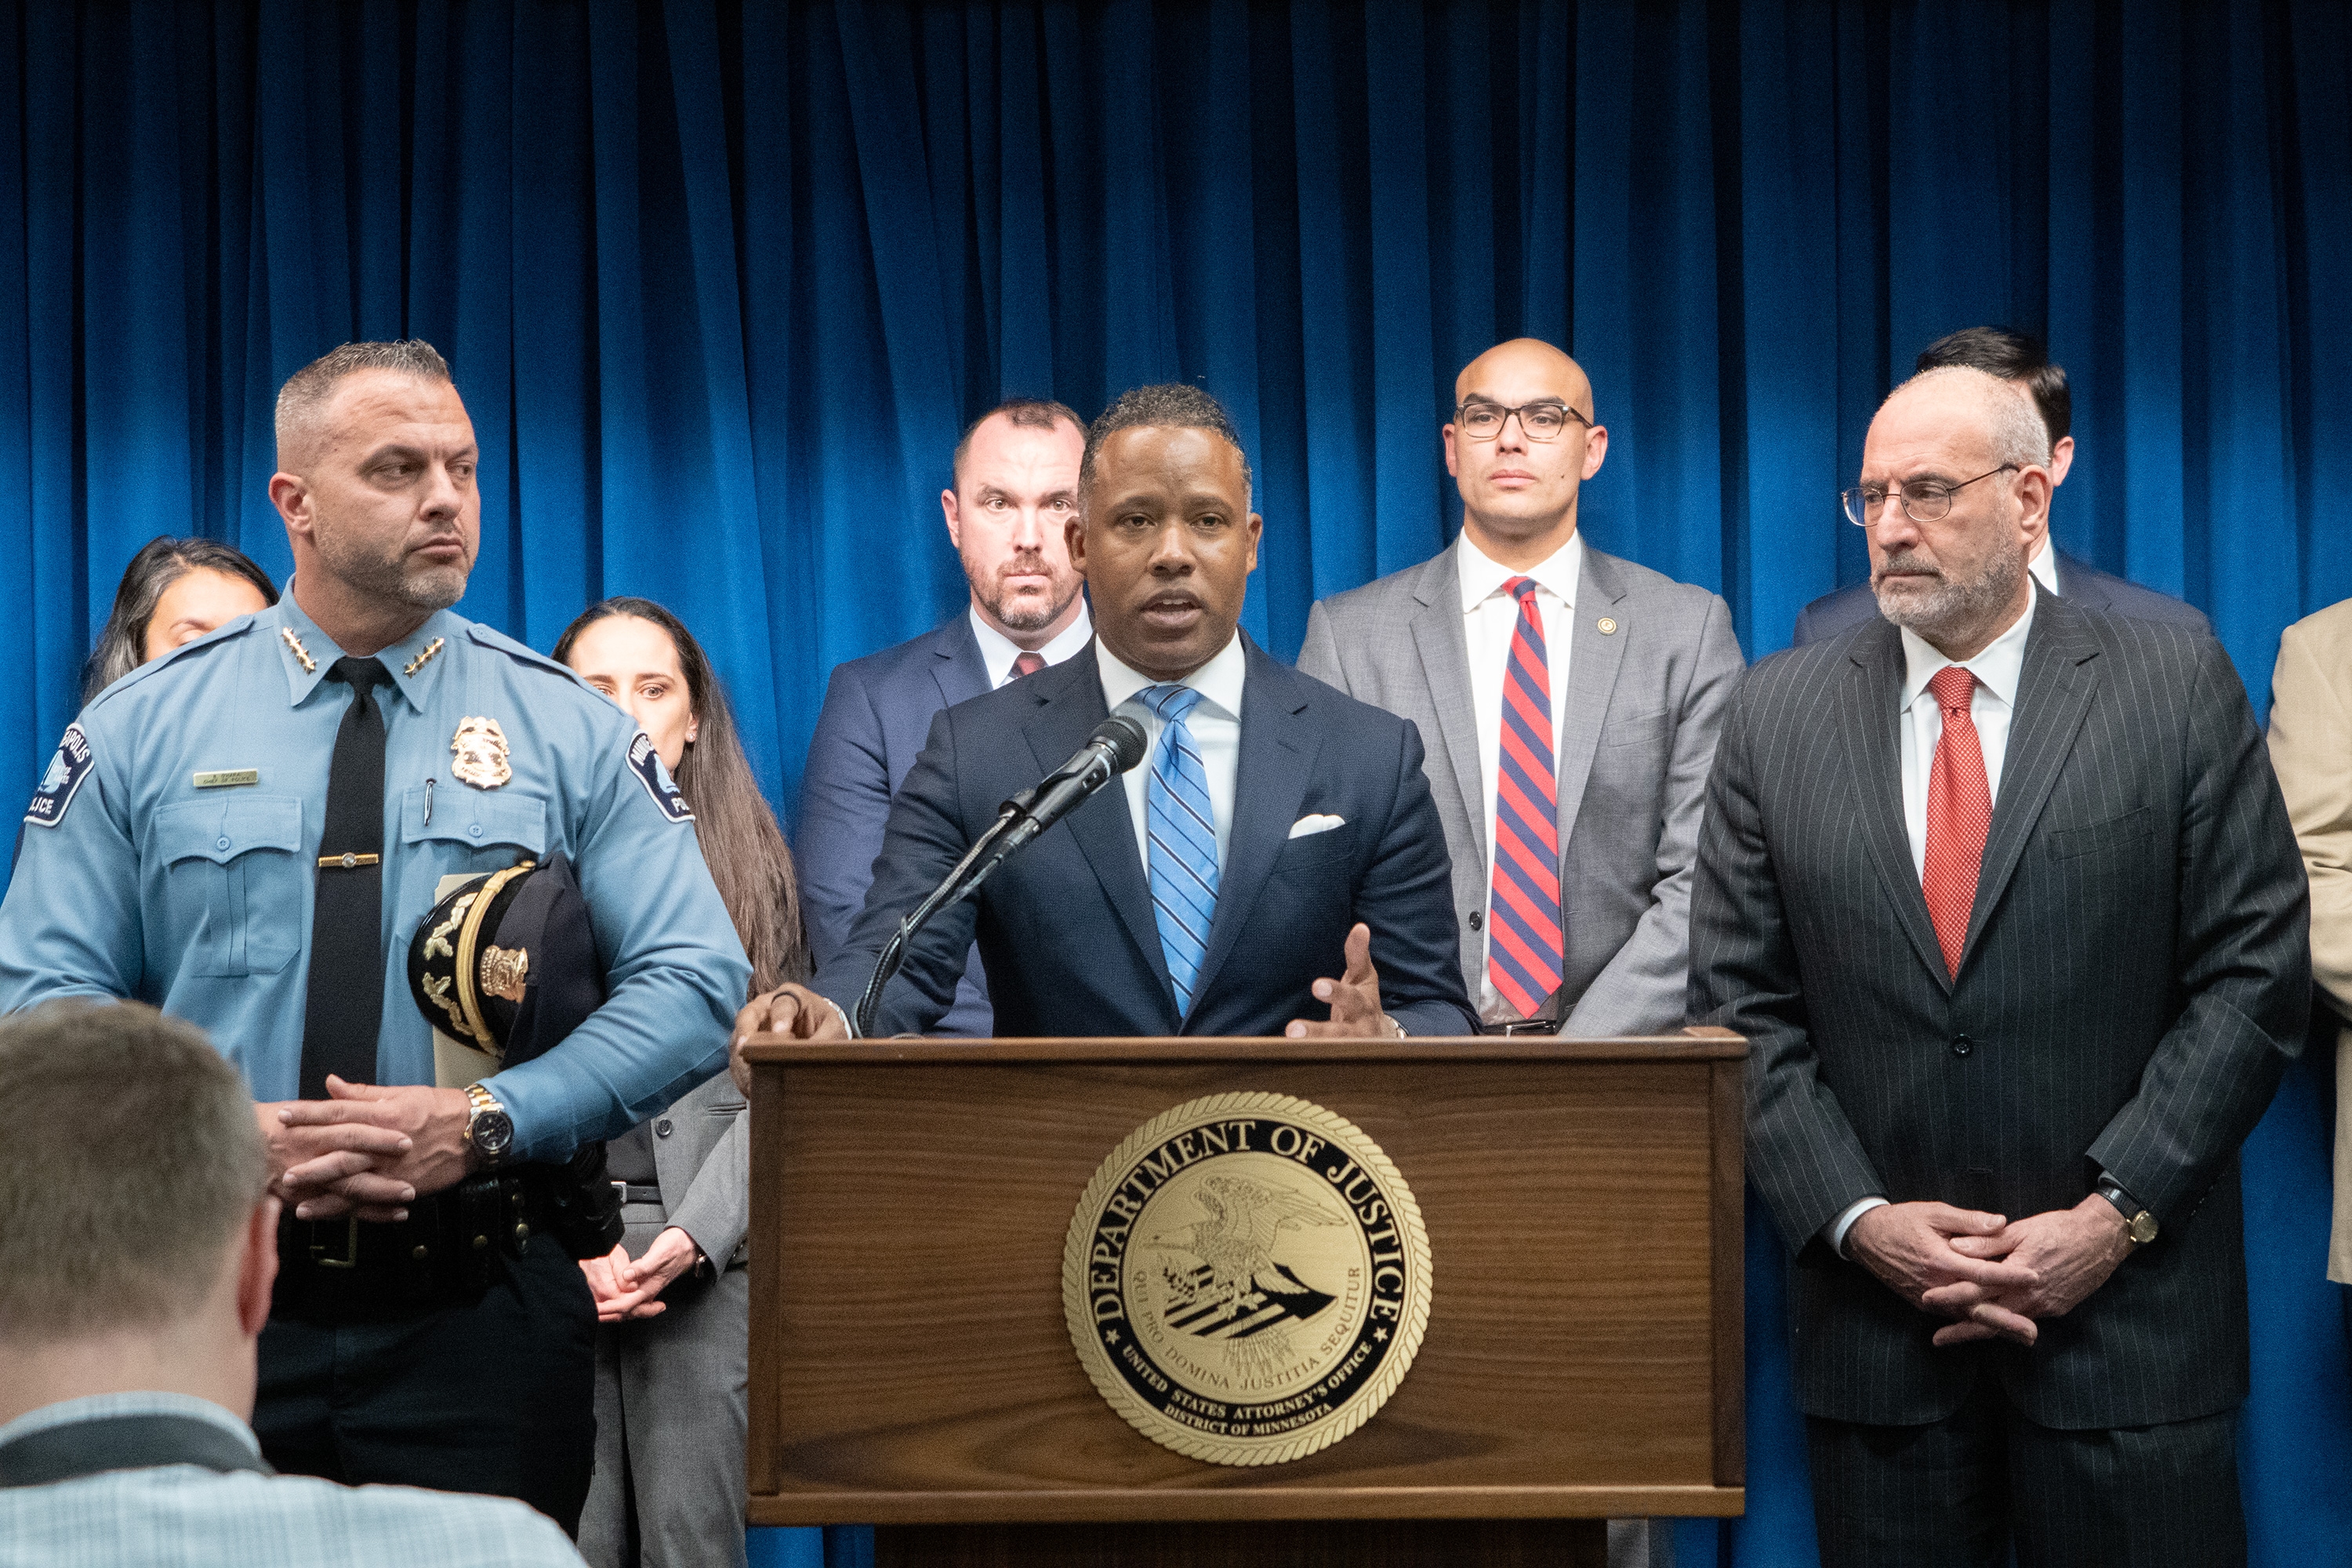 Assistant Attorney General of the Criminal Divison Kenneth A. Polite, Jr. delivers remarks from a podium bearing the United States Attorney's Office for the District of Minnesota seal. To the left stands the Chief of the Minneapolis Police Department Brian O'Hara. To the right stands United States Attorney for the District of Minnesota Andrew M. Luger. Other officials stand in a row behind.